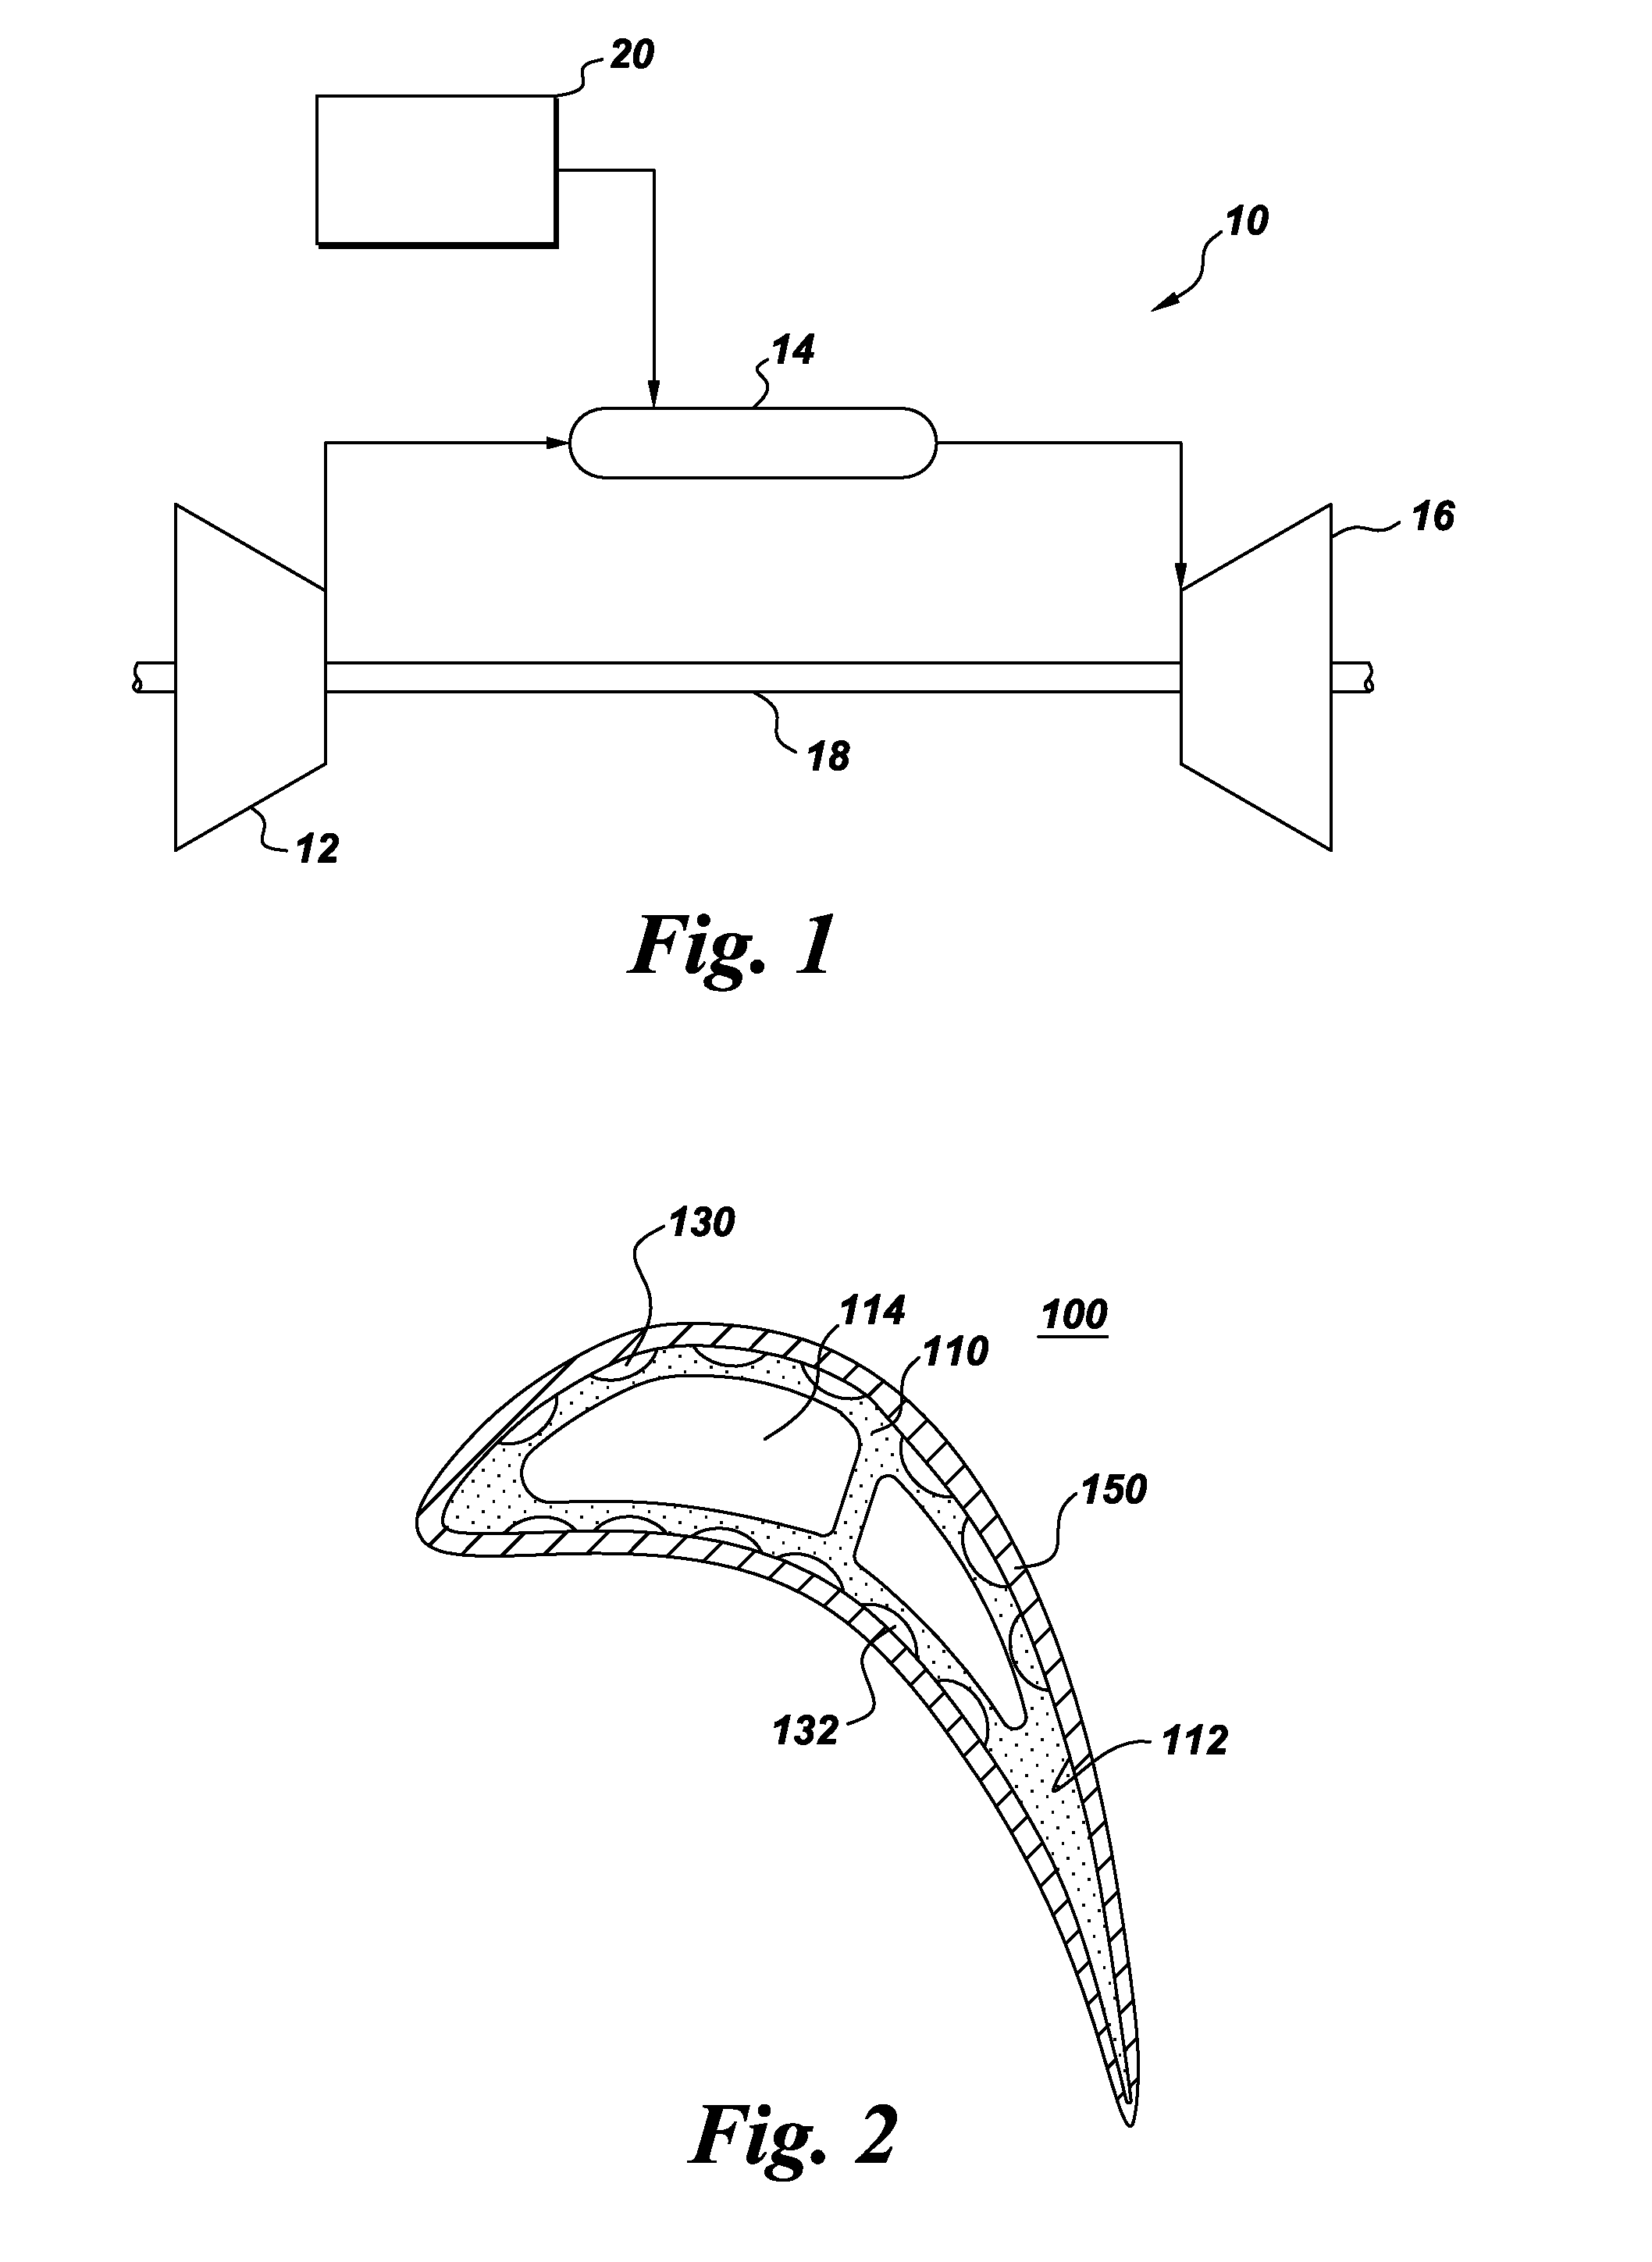 Method of fabricating a component using a fugitive coating